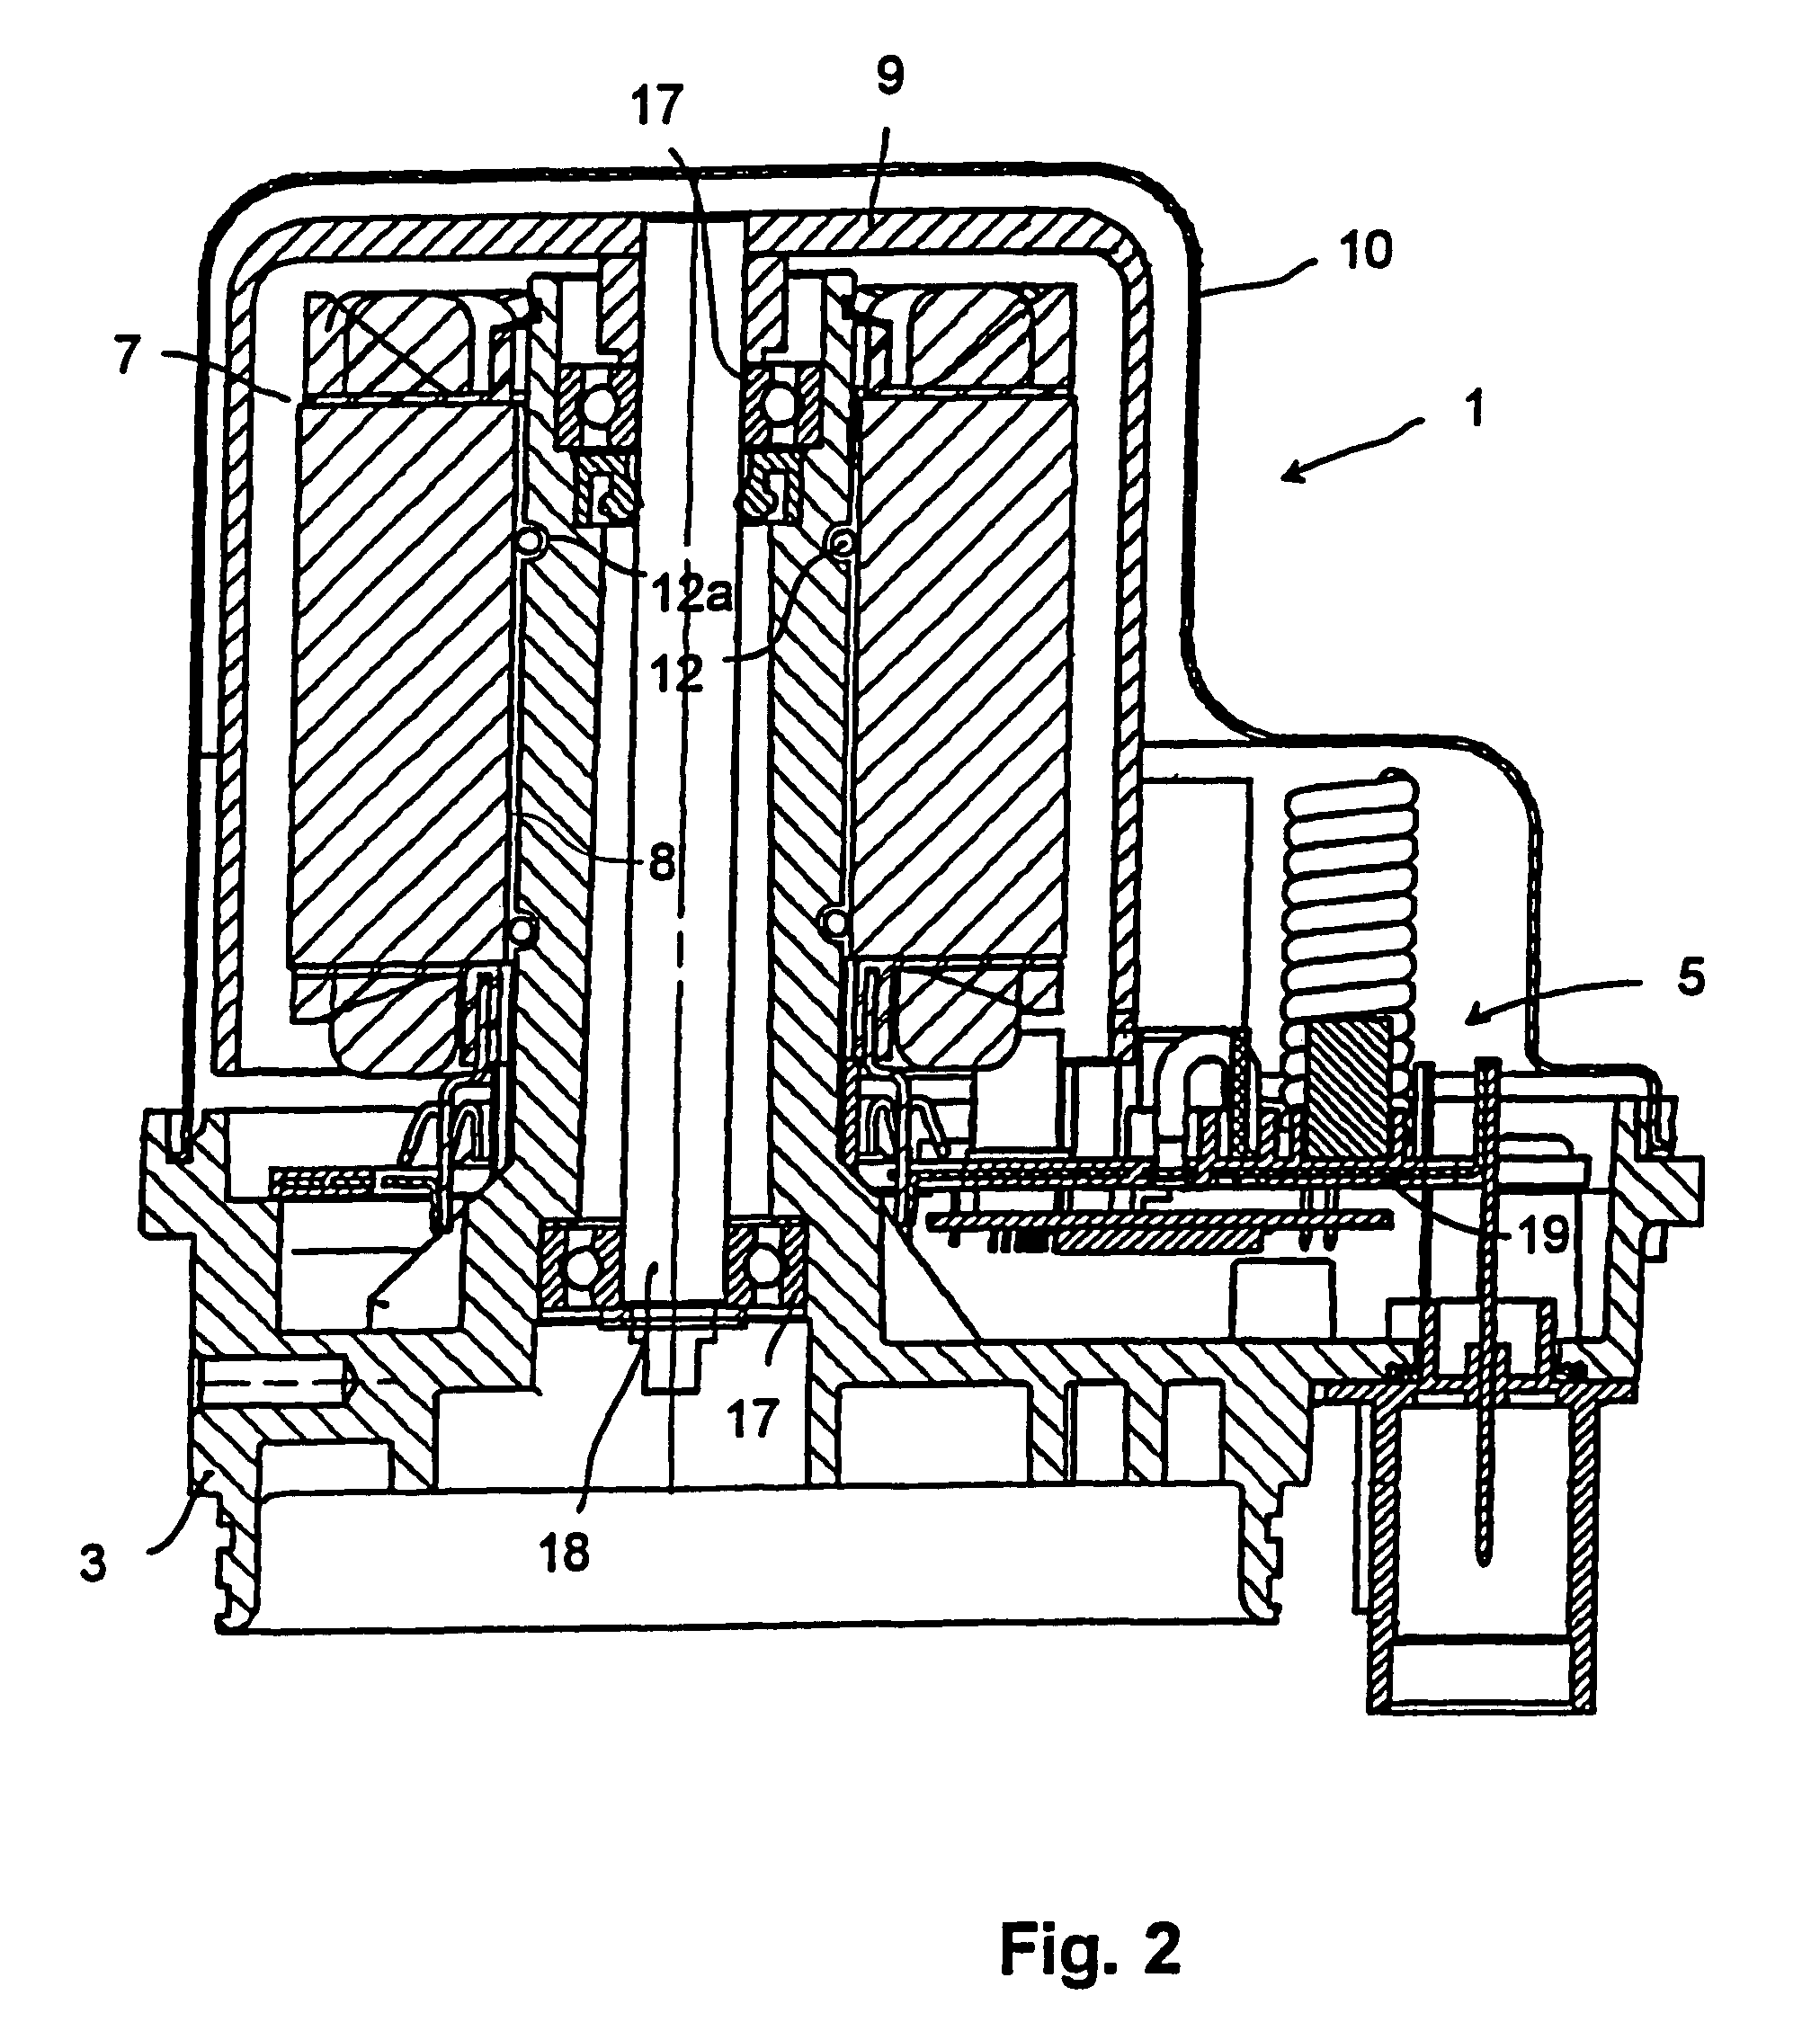 Electromotive drive system for use with a pump of a power-assisted steering system in a motor vehicle